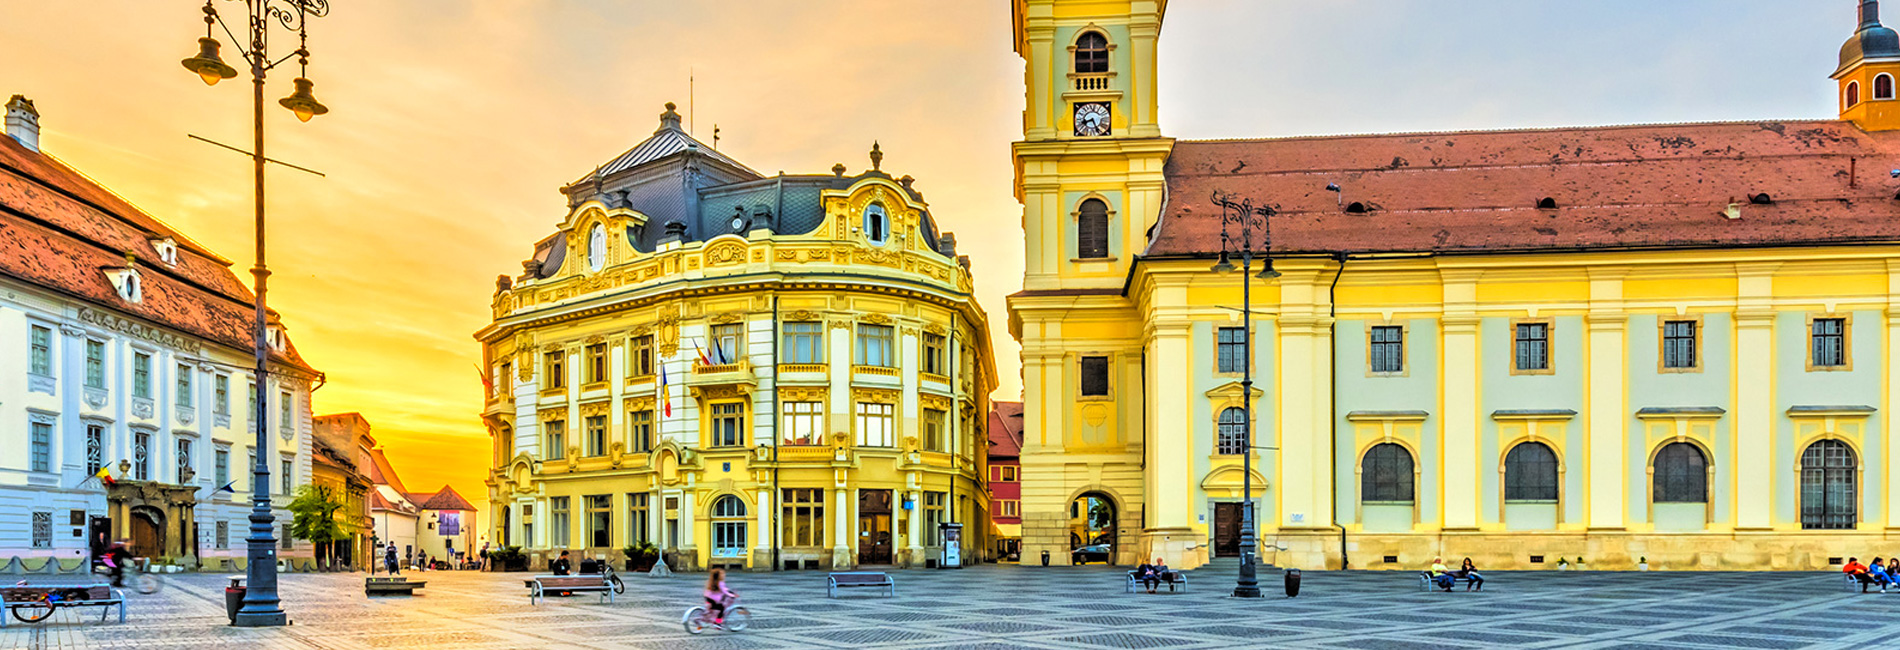 2 - Day Medieval Transylvania with Brasov, Sibiu and Sighisoara Tour from Bucharest